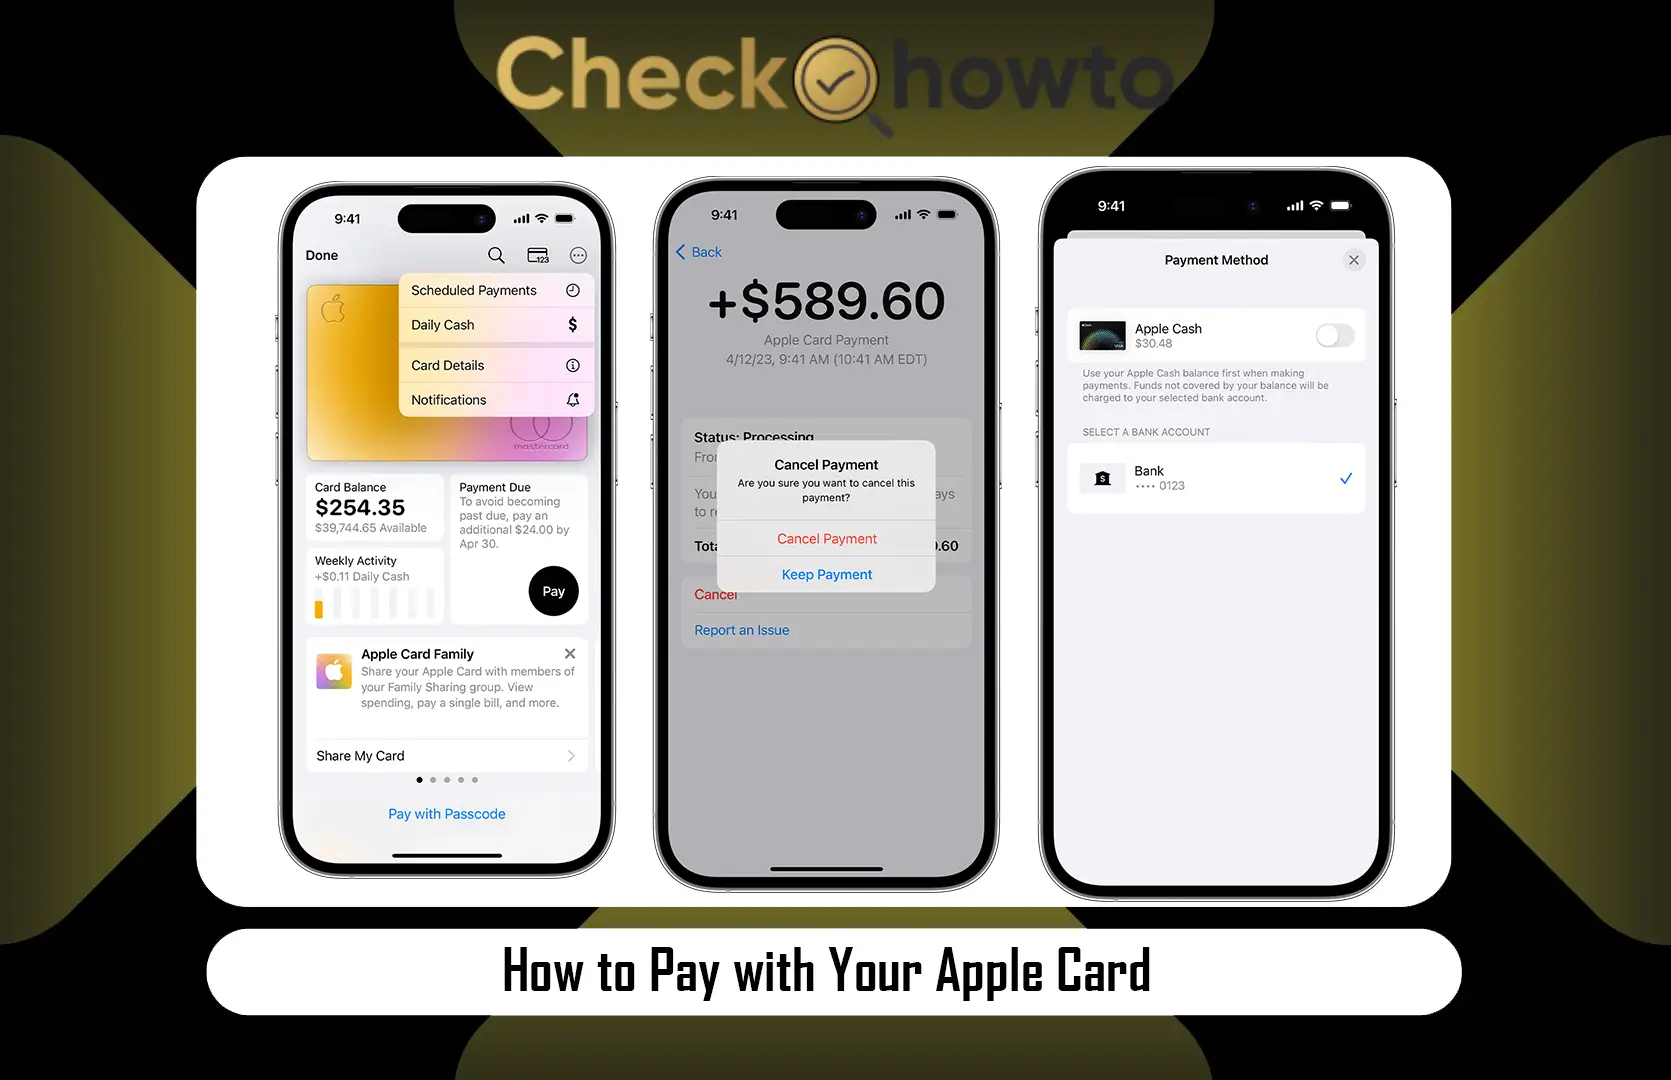 How to Pay with Your Apple Card